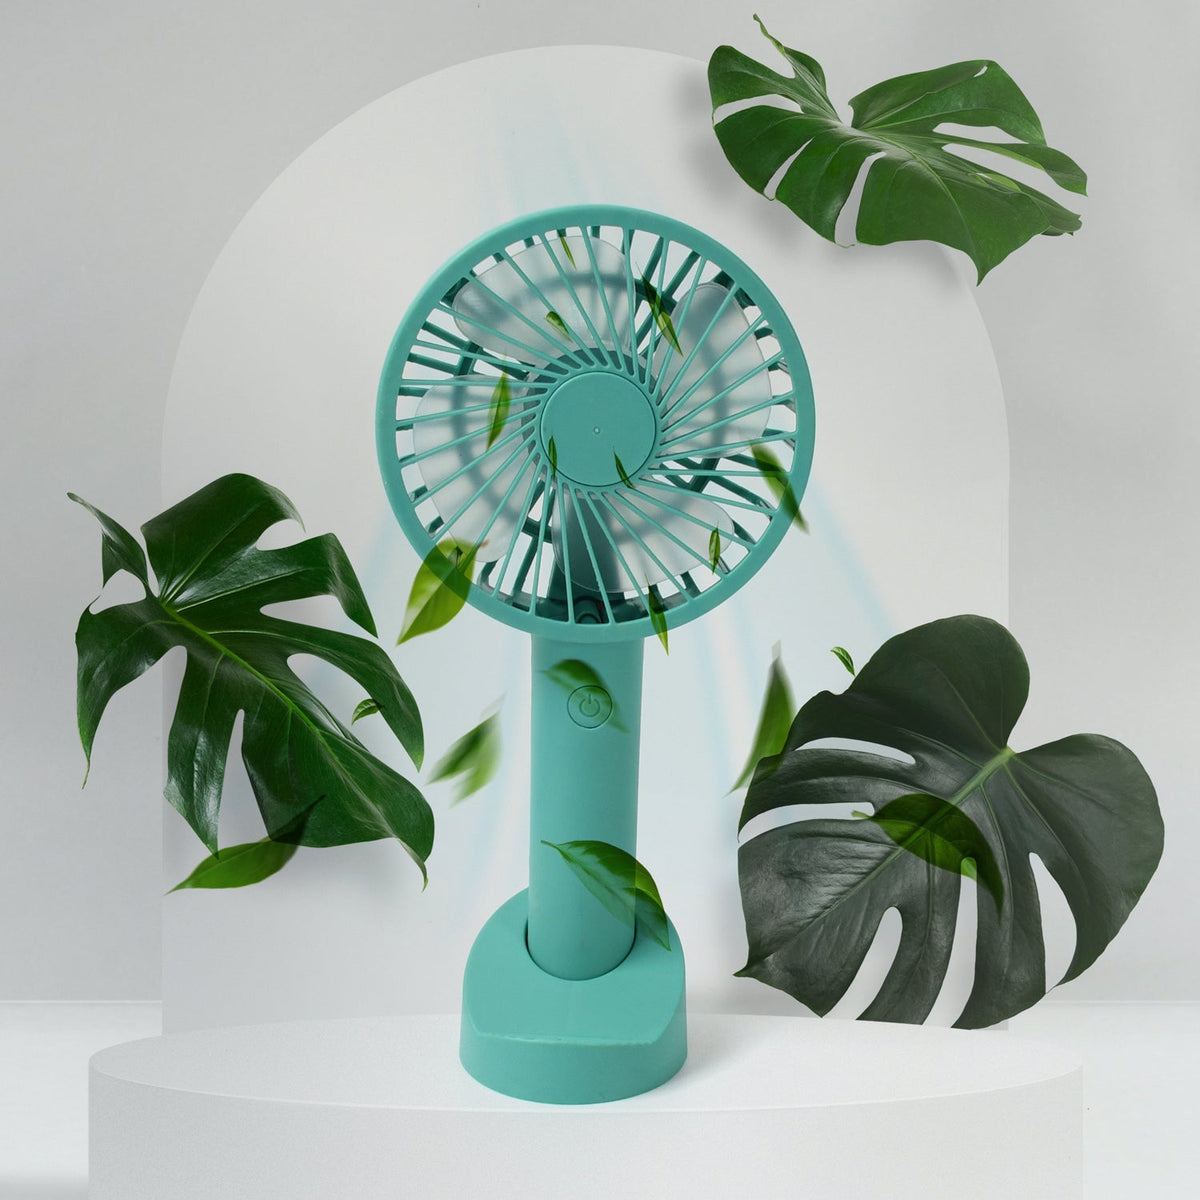 12842 Portable Handheld Fan With 3 Speeds Battery Operated Fan Rechargeable Multi Colors As Base Phone Holder Fan (Battery Included)